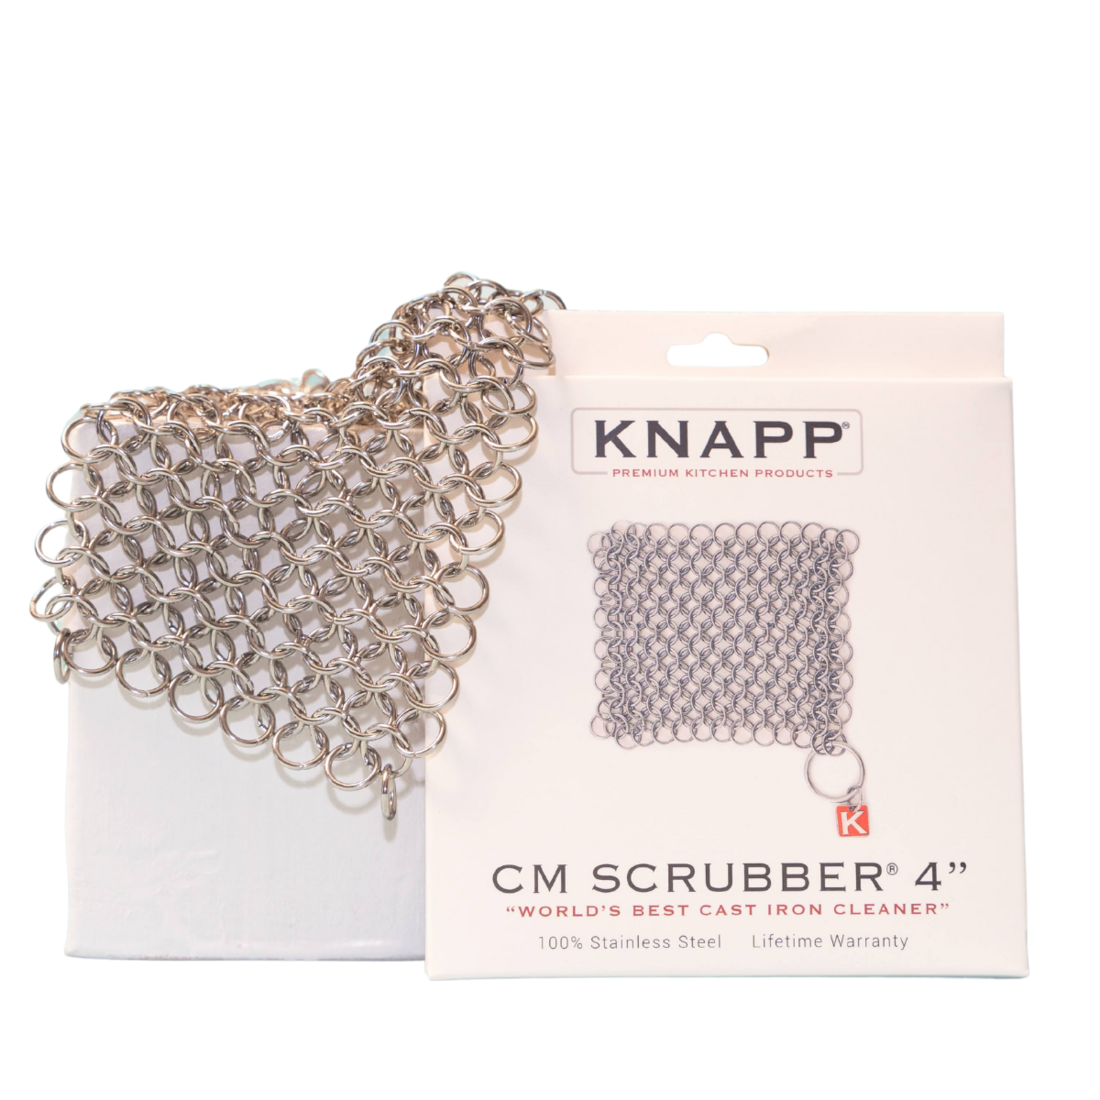 316 Premium Stainless Steel Cast Iron Cleaner, Chainmail Scrubber